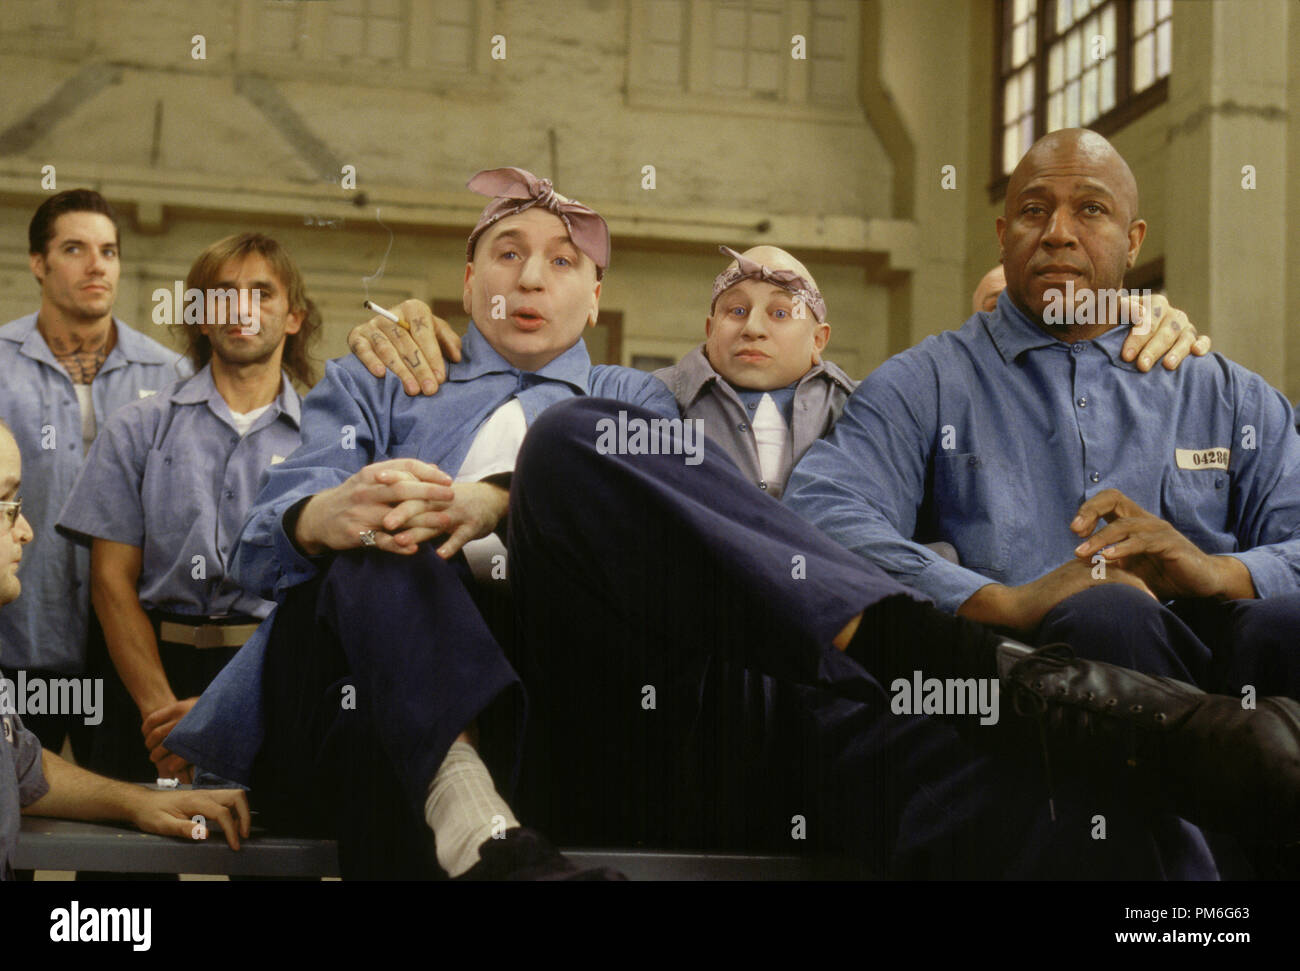 Film Still / Publicity Still from 'Austin Powers in Goldmember' Mike Myers as Dr. Evil, Verne Troyer, Tom 'Tiny' Lister Jr. © 2002 New Line Producitons Photo Credit: Melinda Sue Gordon Stock Photo